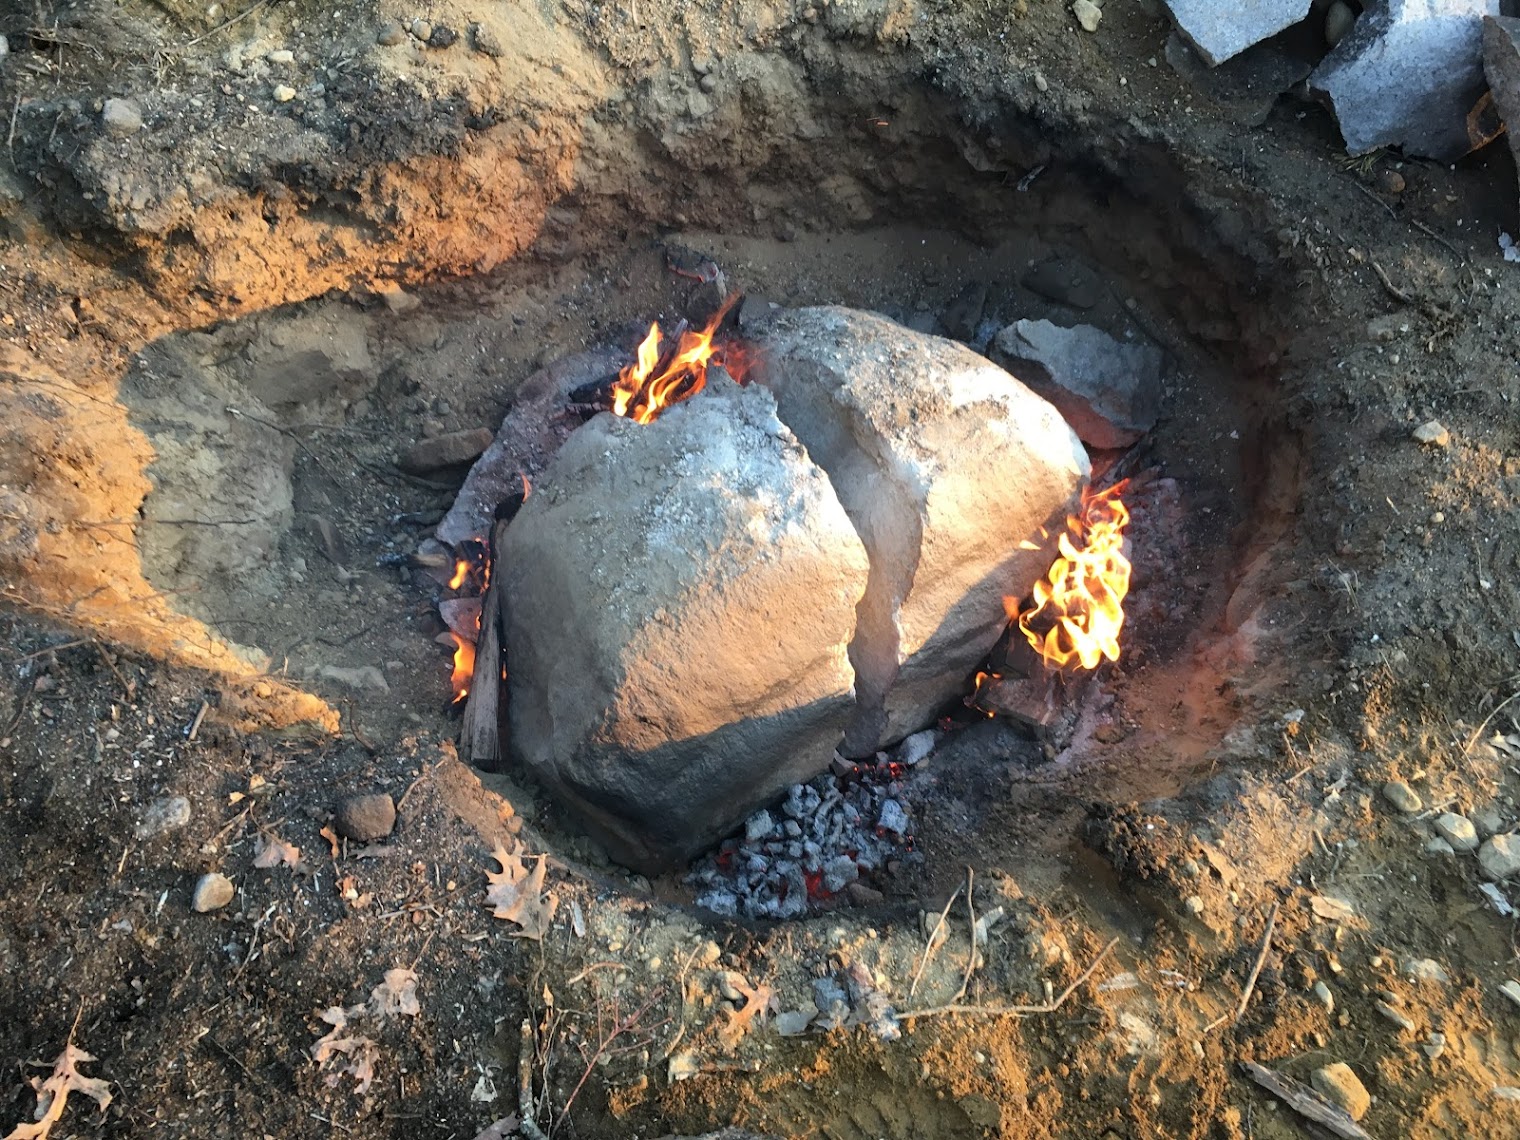 Excavate Rocks Like The Ancients With, Rocks That Burn In Fire Pit